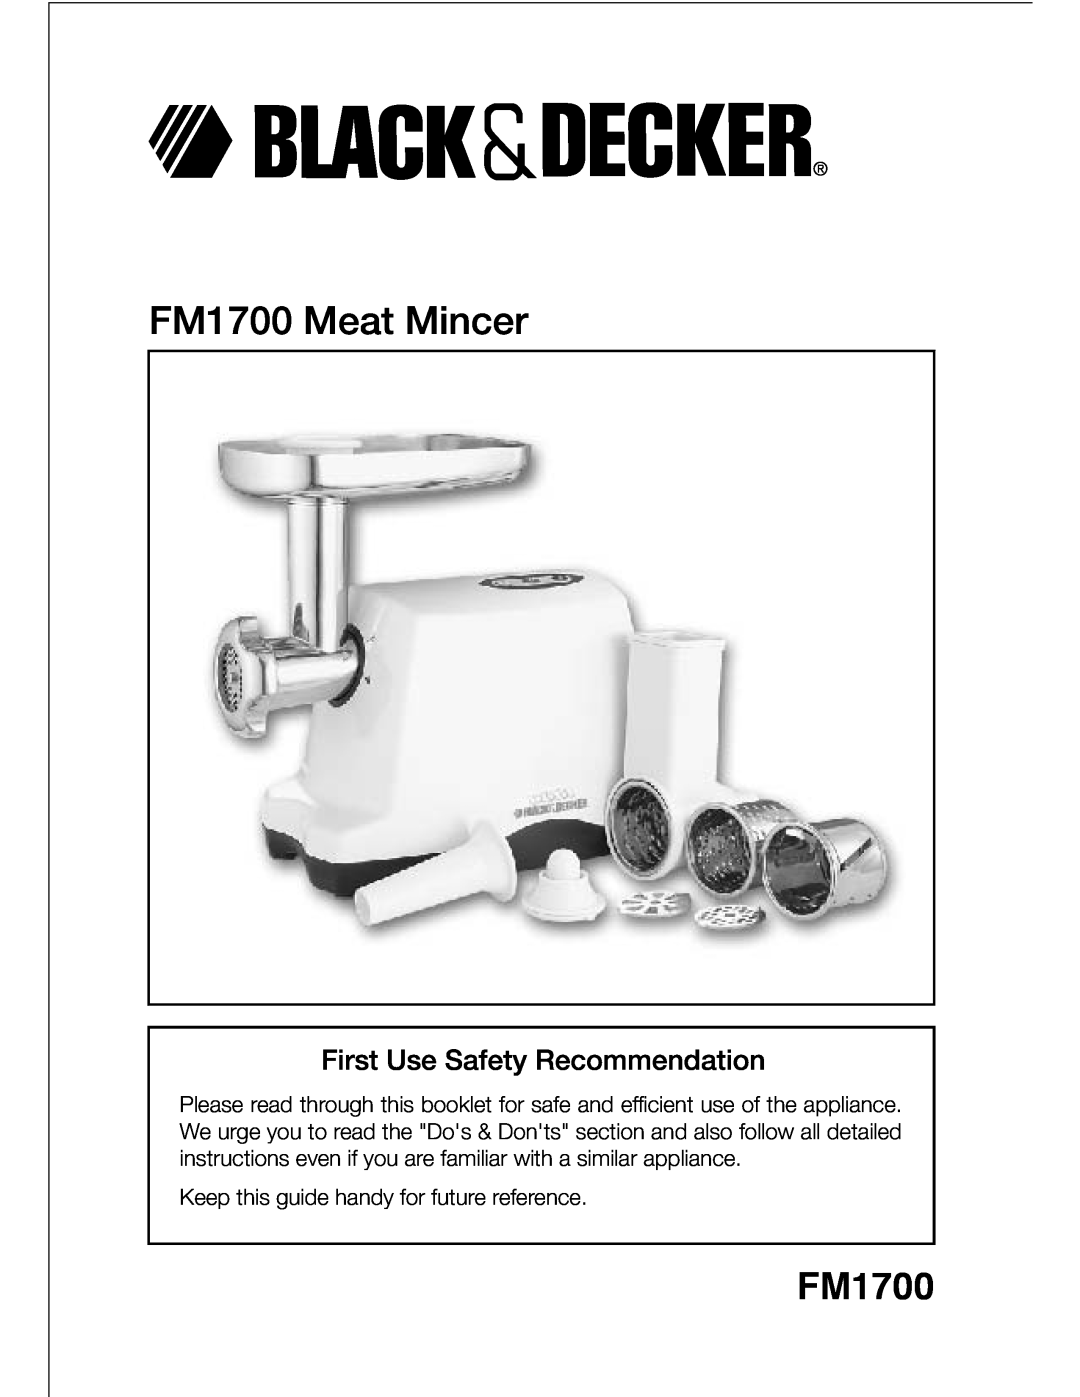 Black & Decker manual FM1700 Meat Mincer, First Use Safety Recommendation 